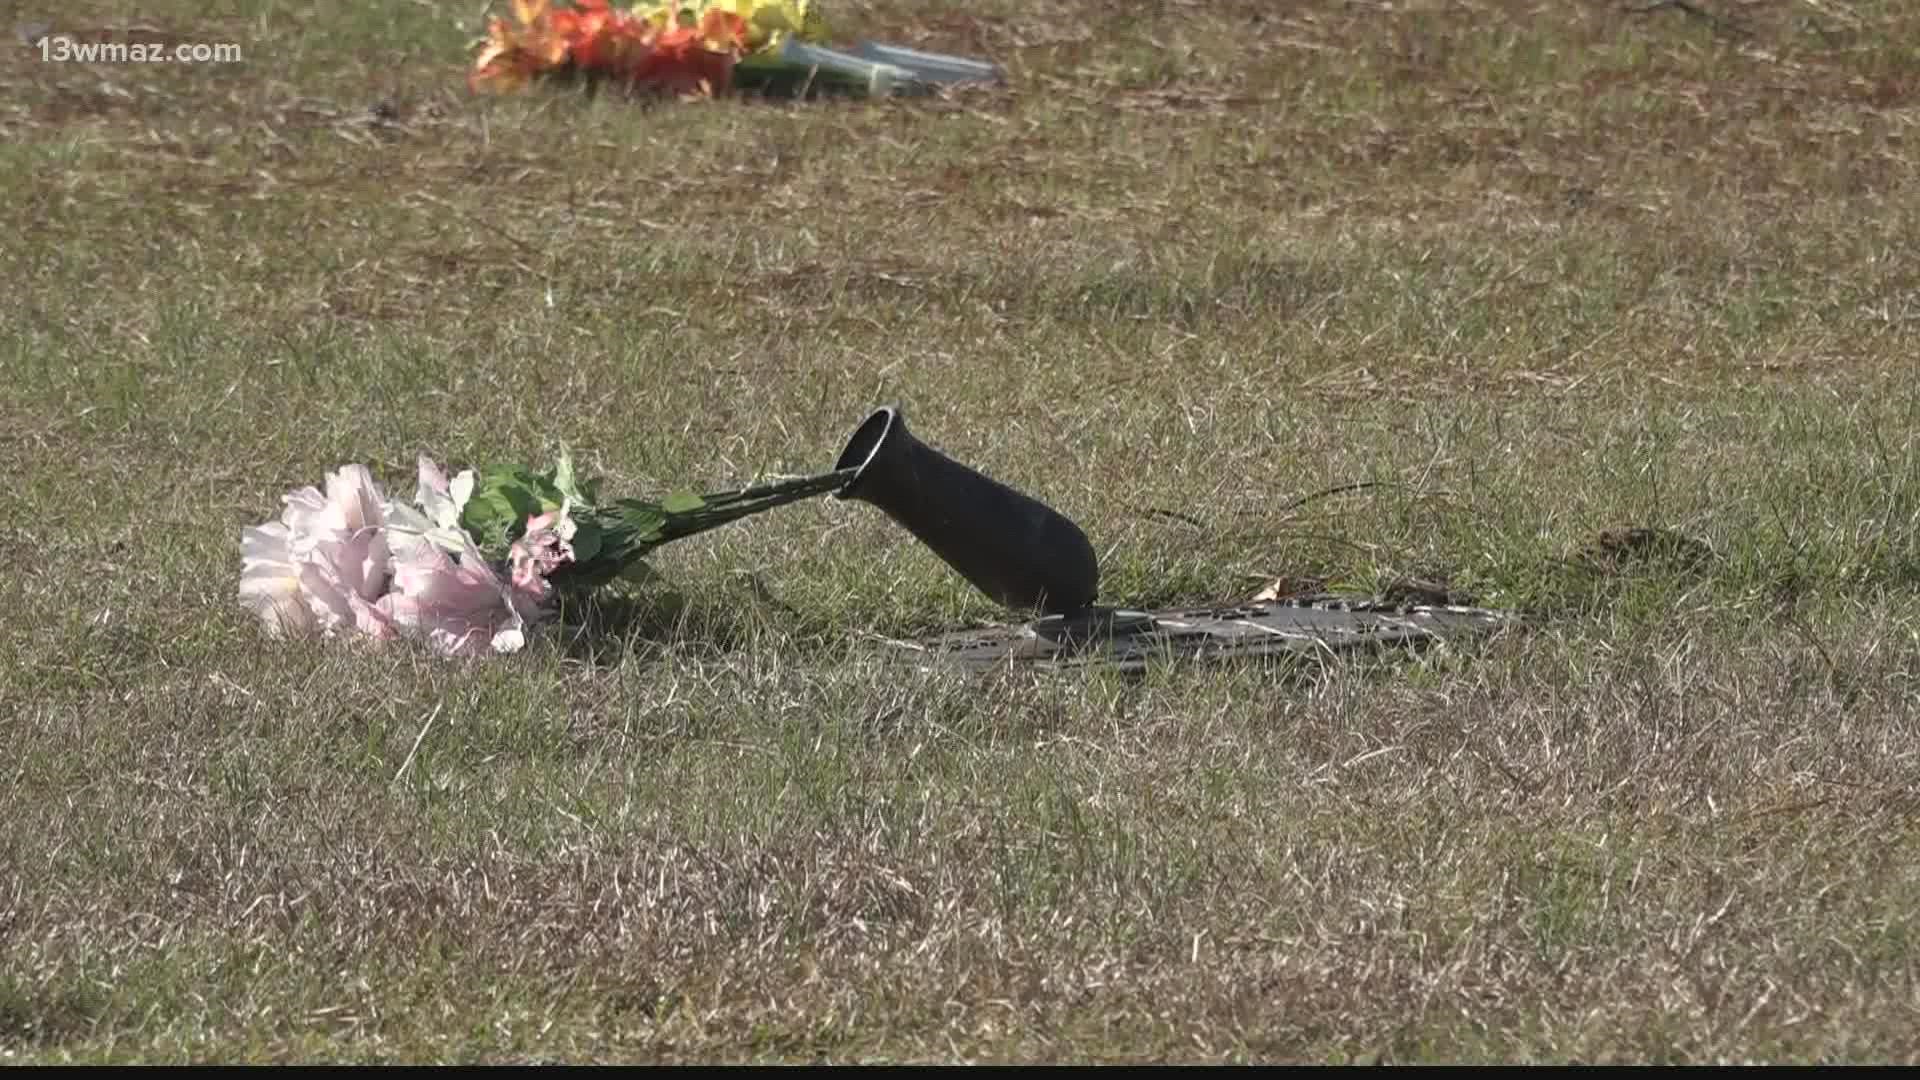 Lisa Bryant said a worker drove over her granddaughter's gravestone to get to another grave, and it wasn't the first time she found the plot in bad condition.